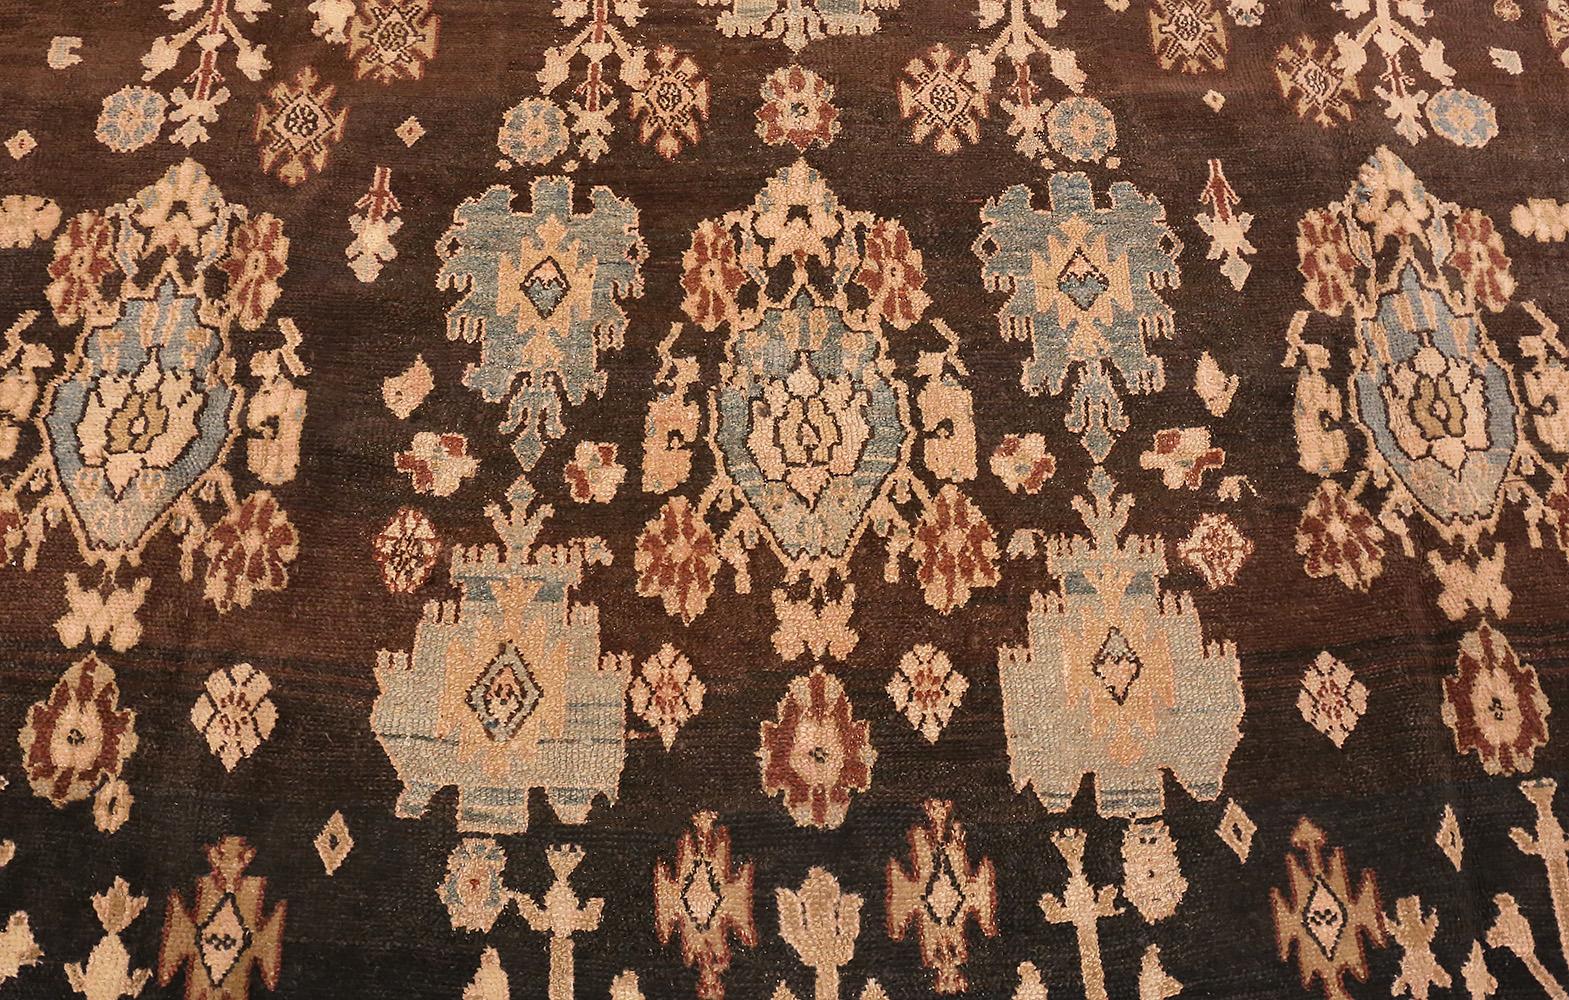 Large impressive tribal design room size antique Persian Malayer rug, country of origin / rug type: Persian rugs, date: circa late 19th century. Size: 10 ft 7 in x 15 ft 7 in (3.23 m x 4.75 m). Through the use of skillful contrast and elegantly